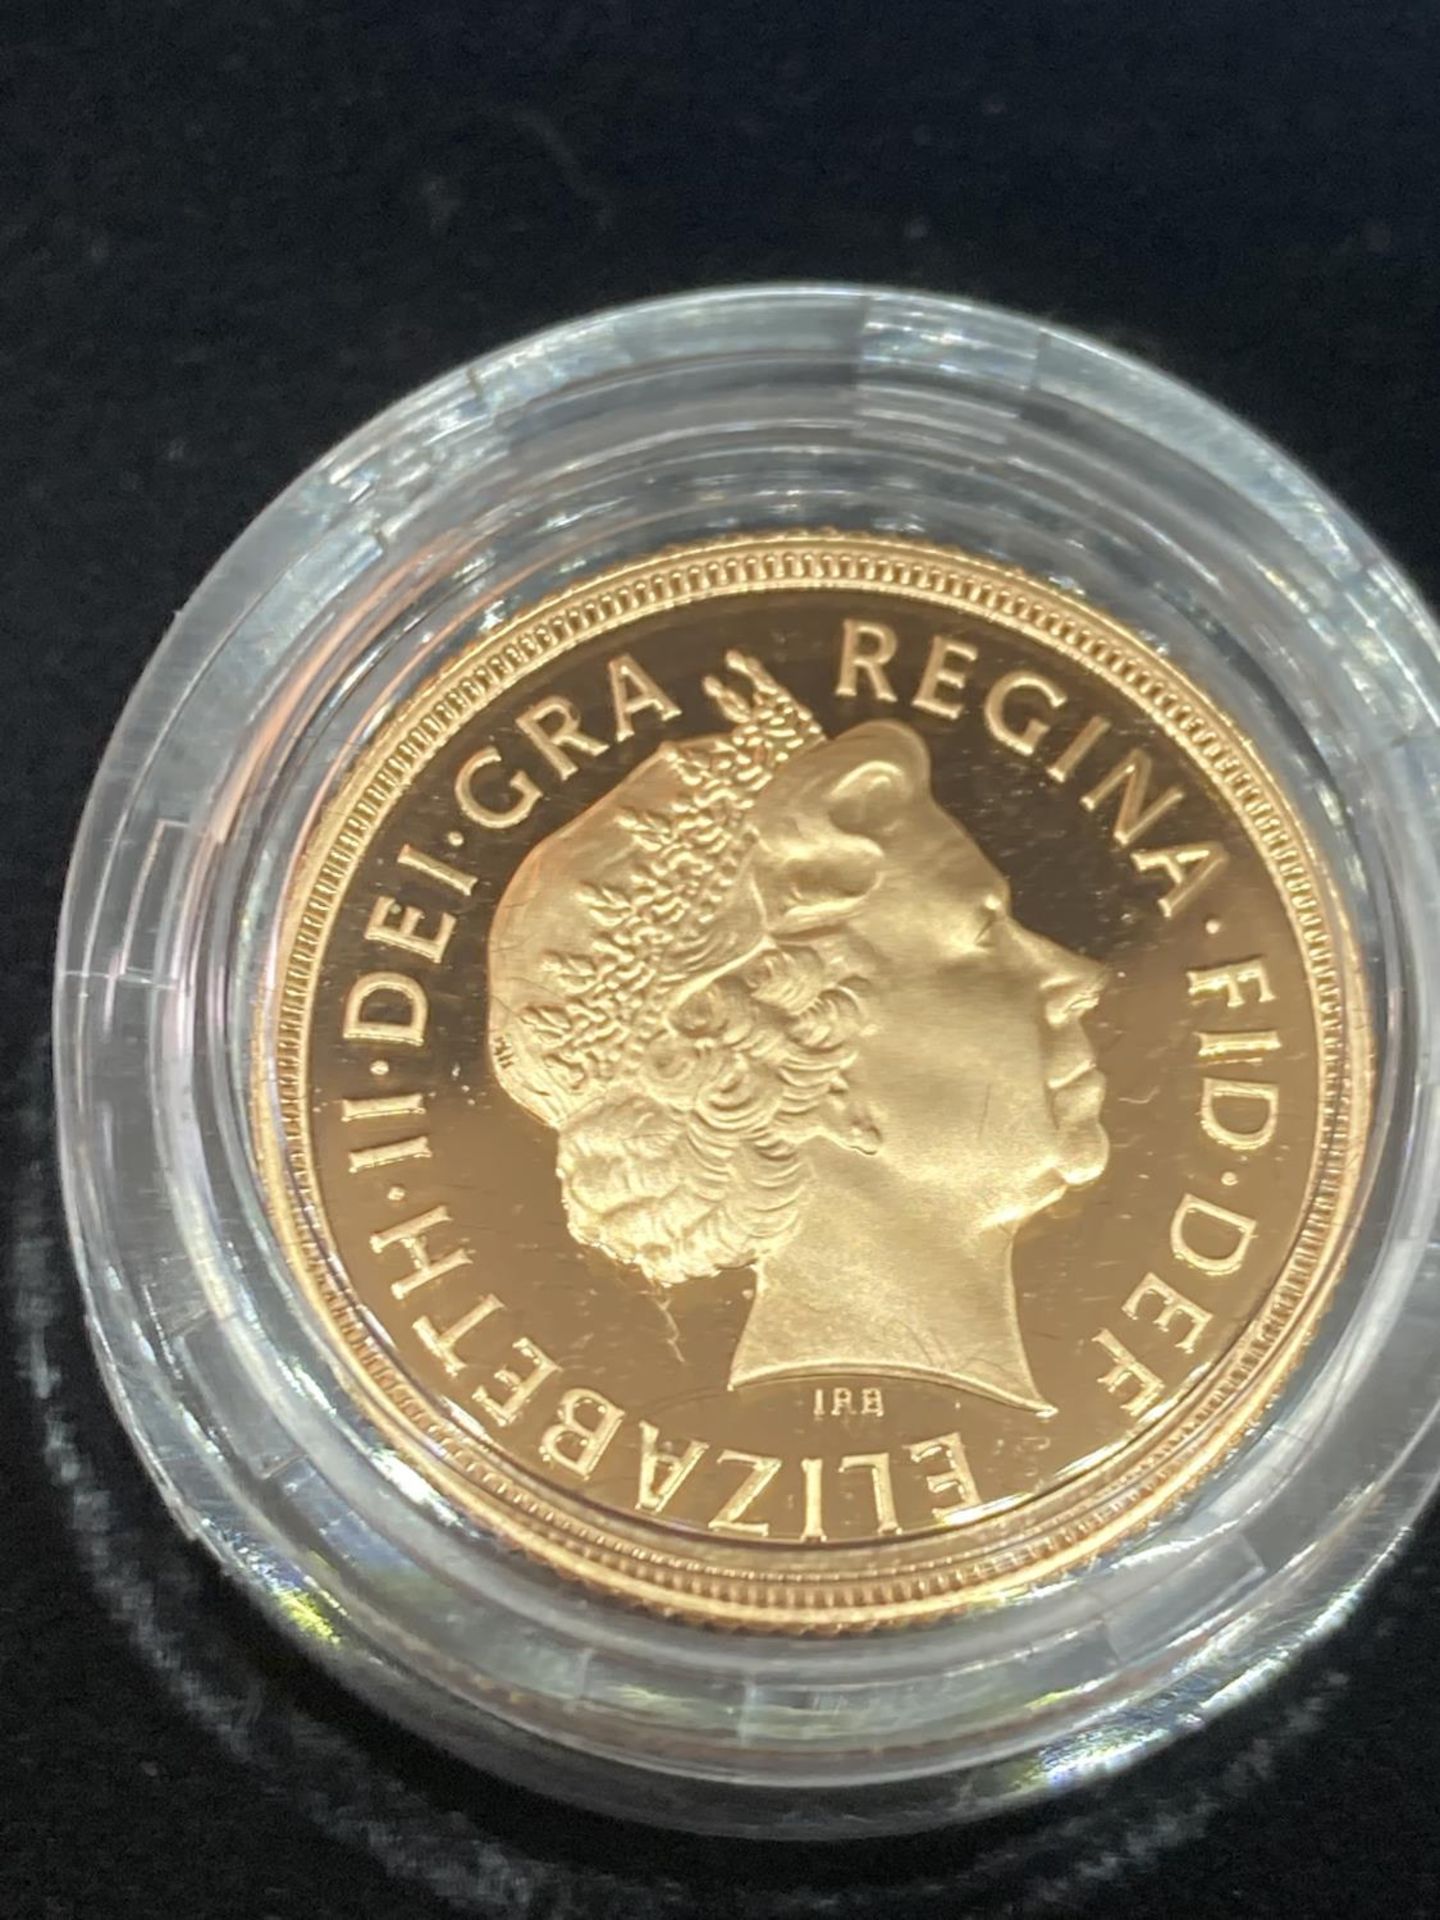 A 2002 ROYAL MINT GOLD PROOF FOUR COIN COLLECTION CELEBRATING QUEEN ELIZABETH II GOLDEN JUBILEE TO - Image 7 of 11